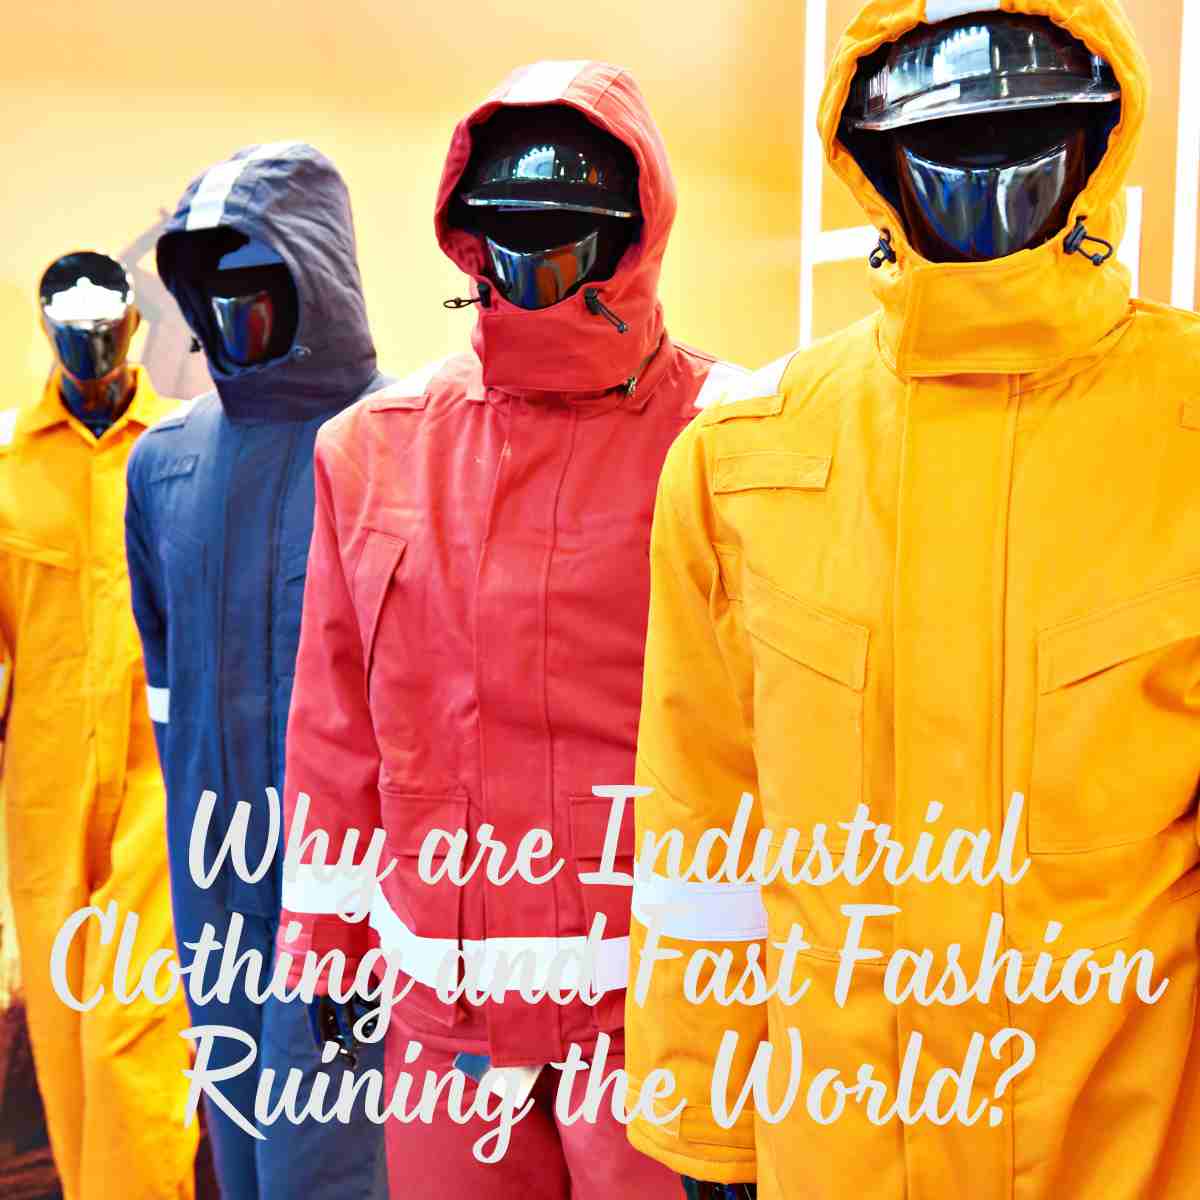 Why are Industrial Clothing and Fast Fashion Ruining the World?